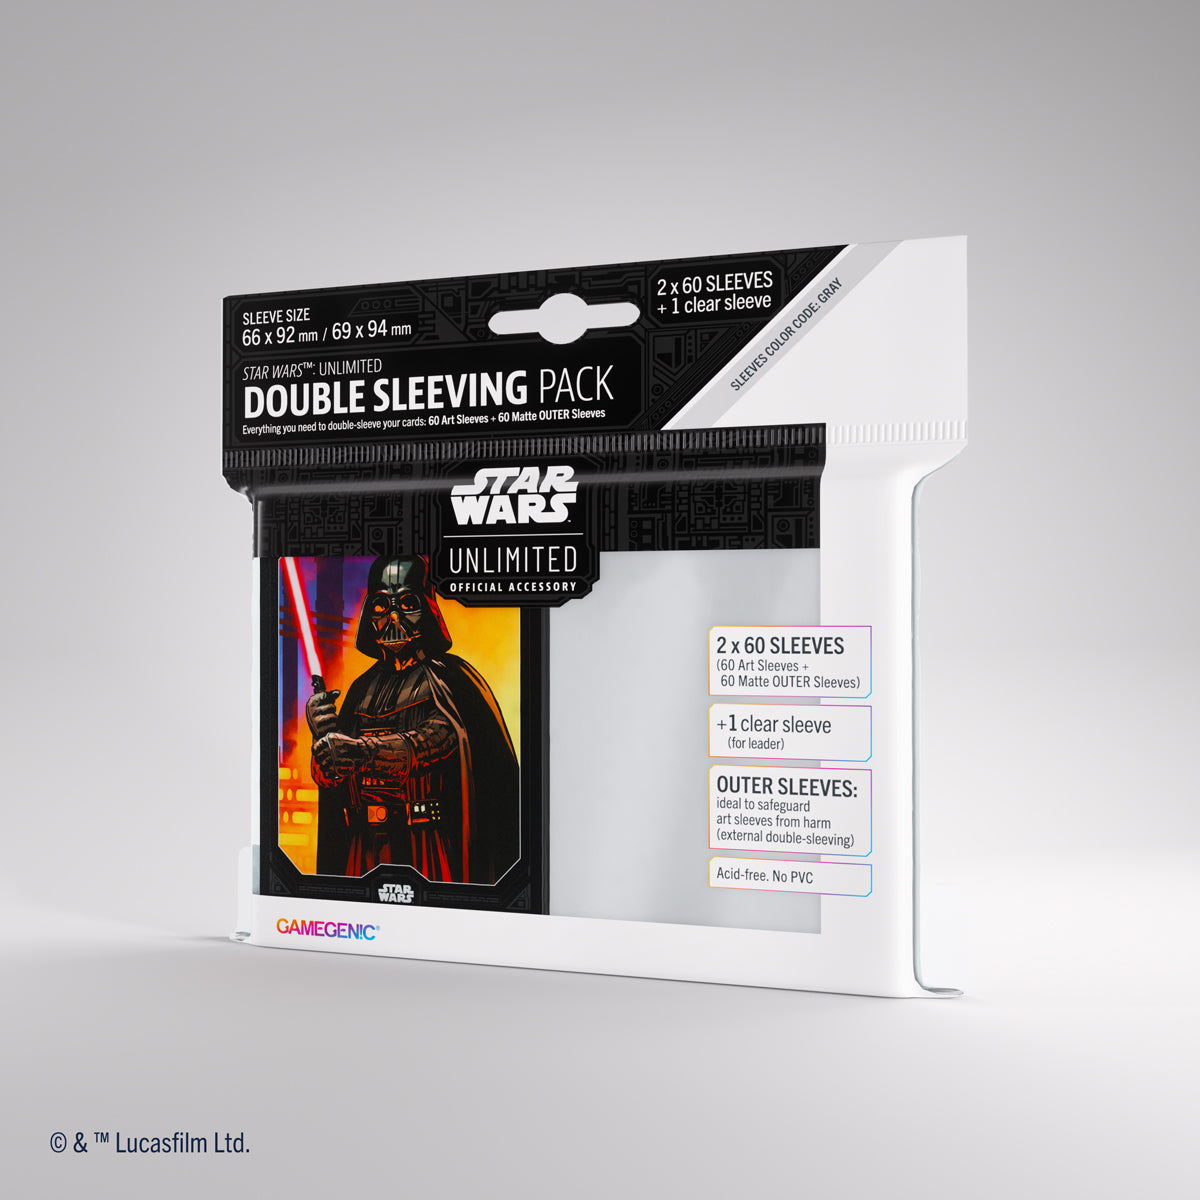 Gamegenic Star Wars Unlimited Double Sleeving Pack Darth Vader (Preorder)